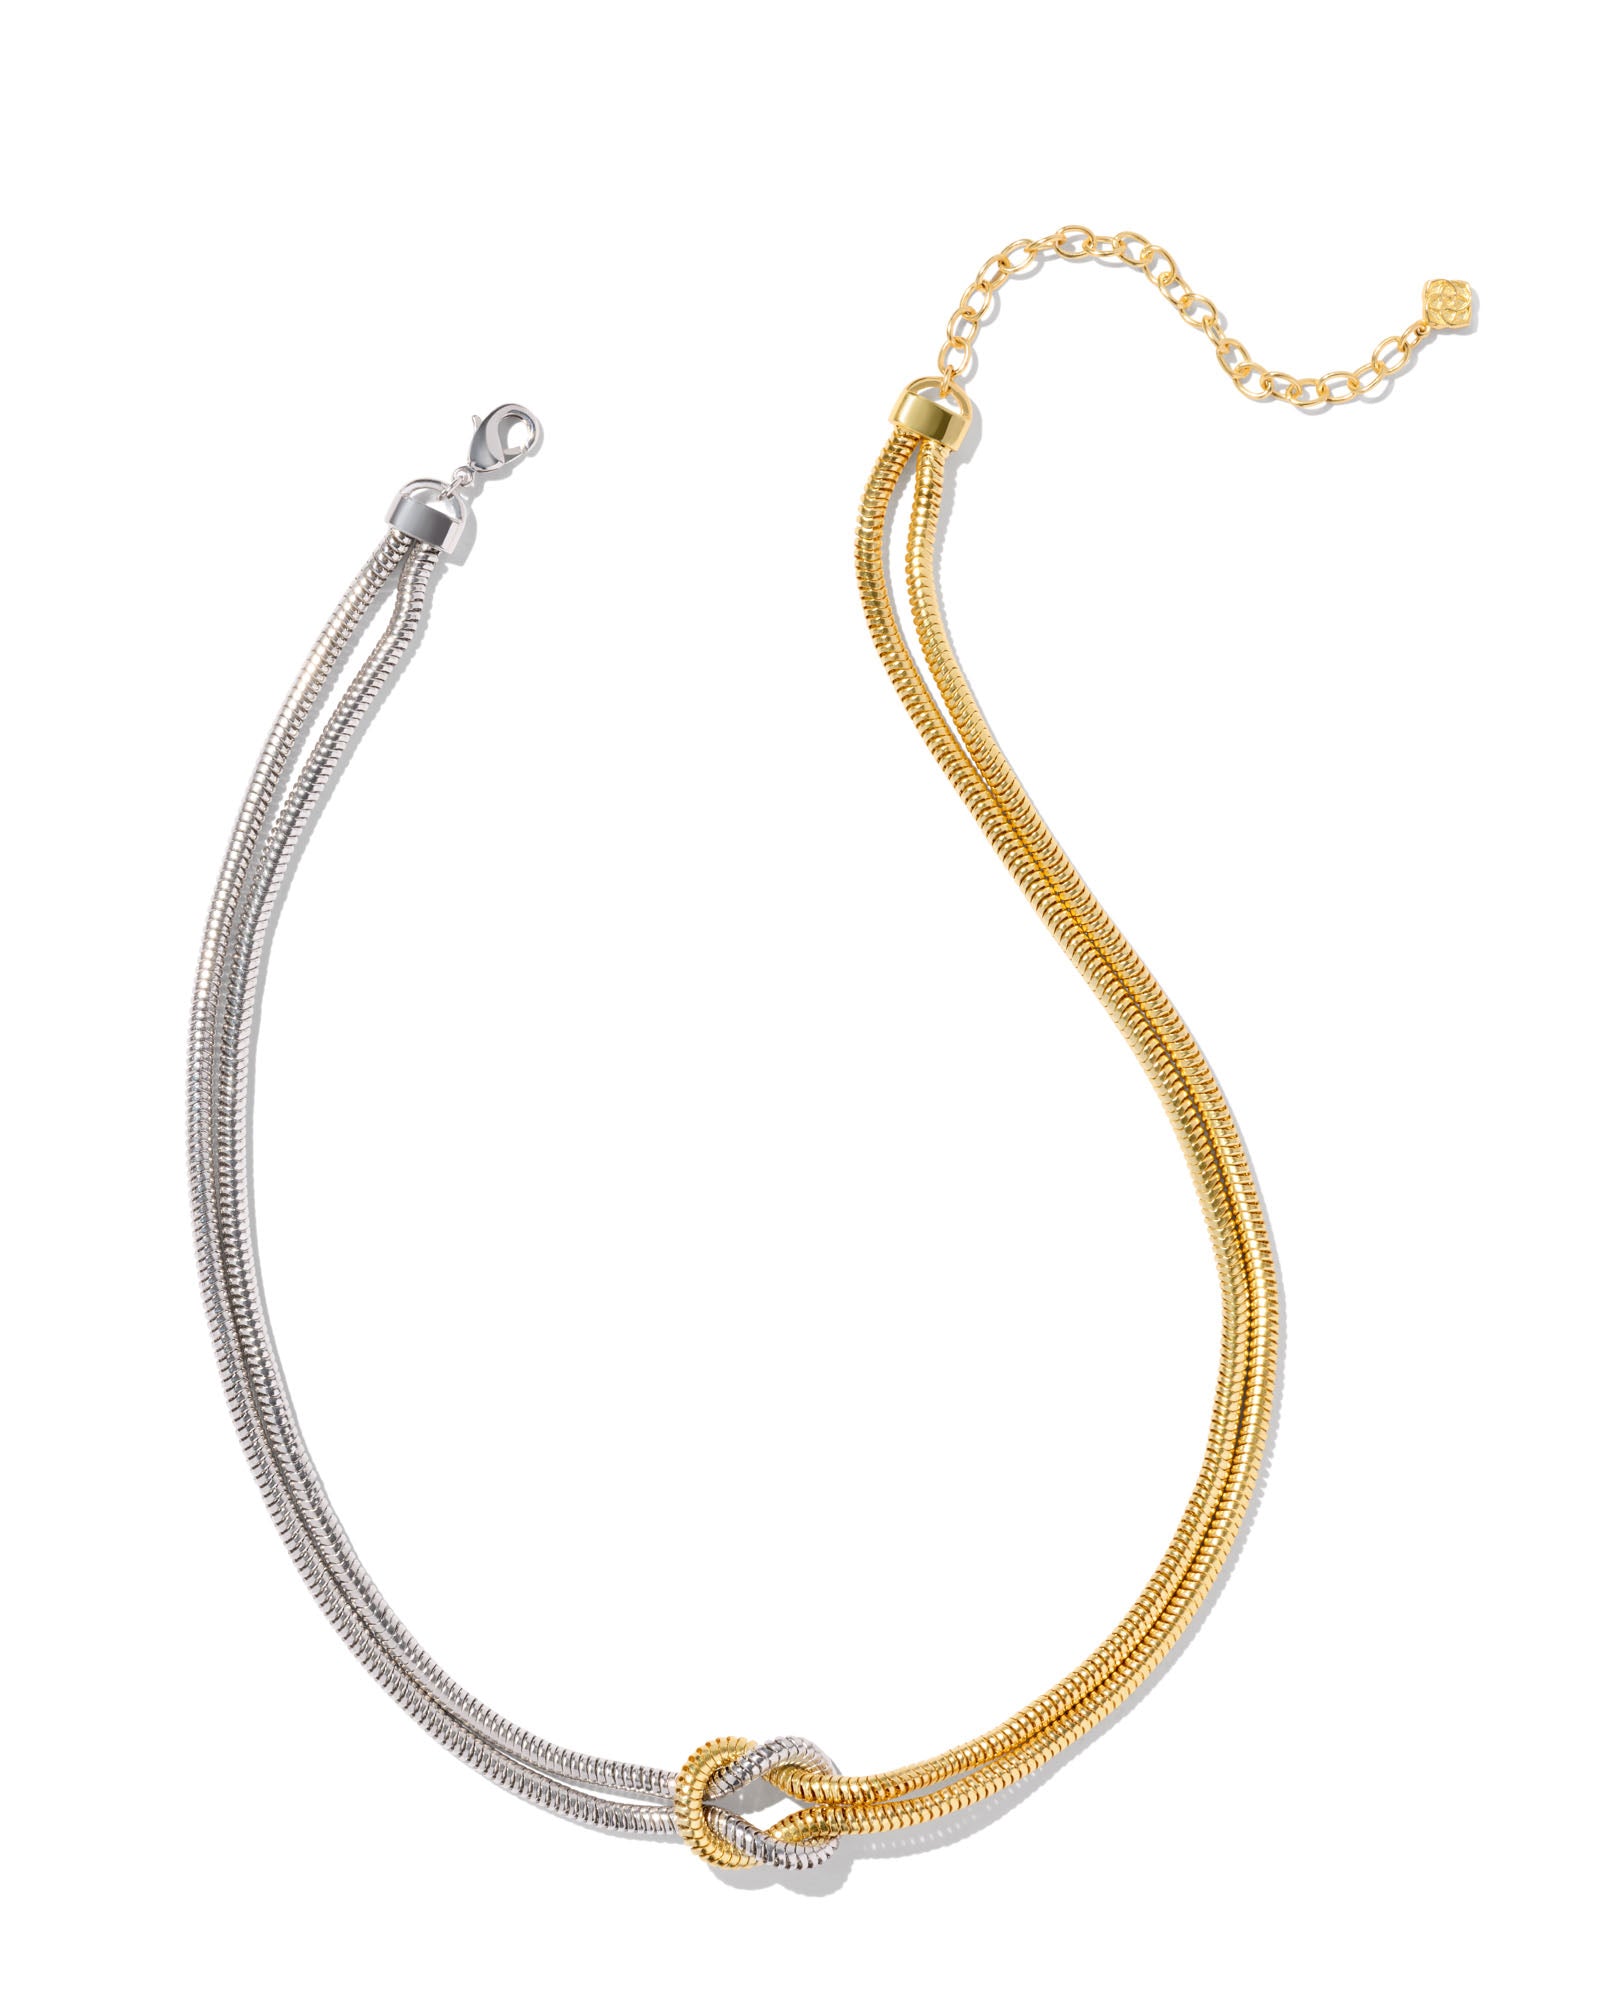 Kendra Scott Annie Chain Knot Necklace in Gold and Rhodium Mixed Metal Plated